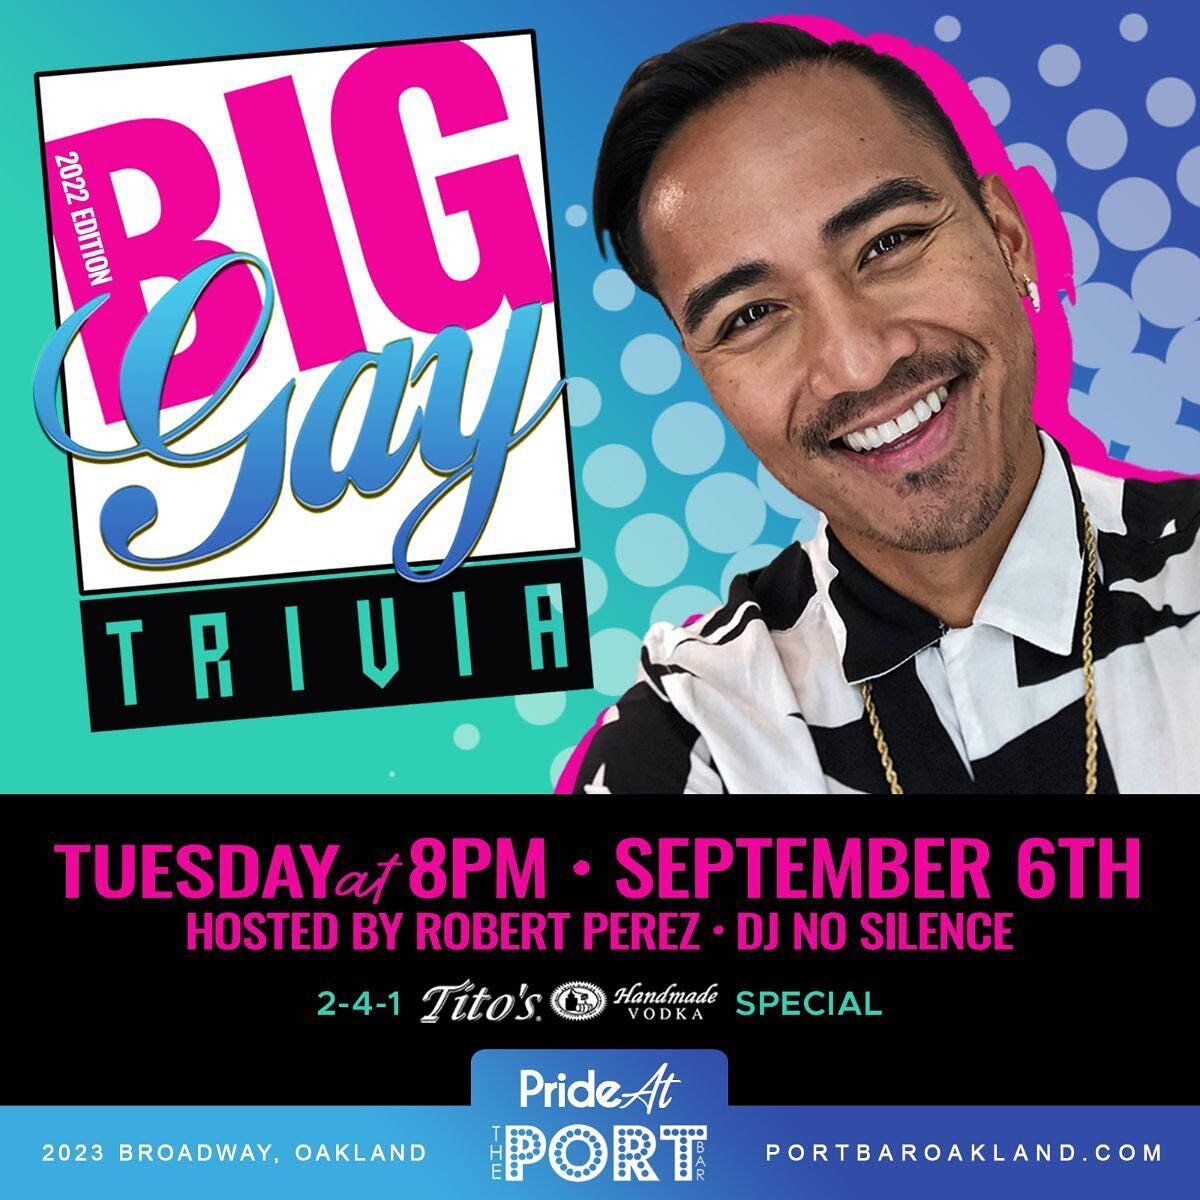 Enjoy your Tuesday with some trivia, prizes and Tito&rsquo;s 2-4-1 cocktails, hosted by Robert Perez &amp; music by DJ No Silence.

#lesbian #gay #bi #transgender #lgbt #drag #queeroakland #gays #instagay #Oaklandloveit #qpoc #oaklandbars #keepitoakl